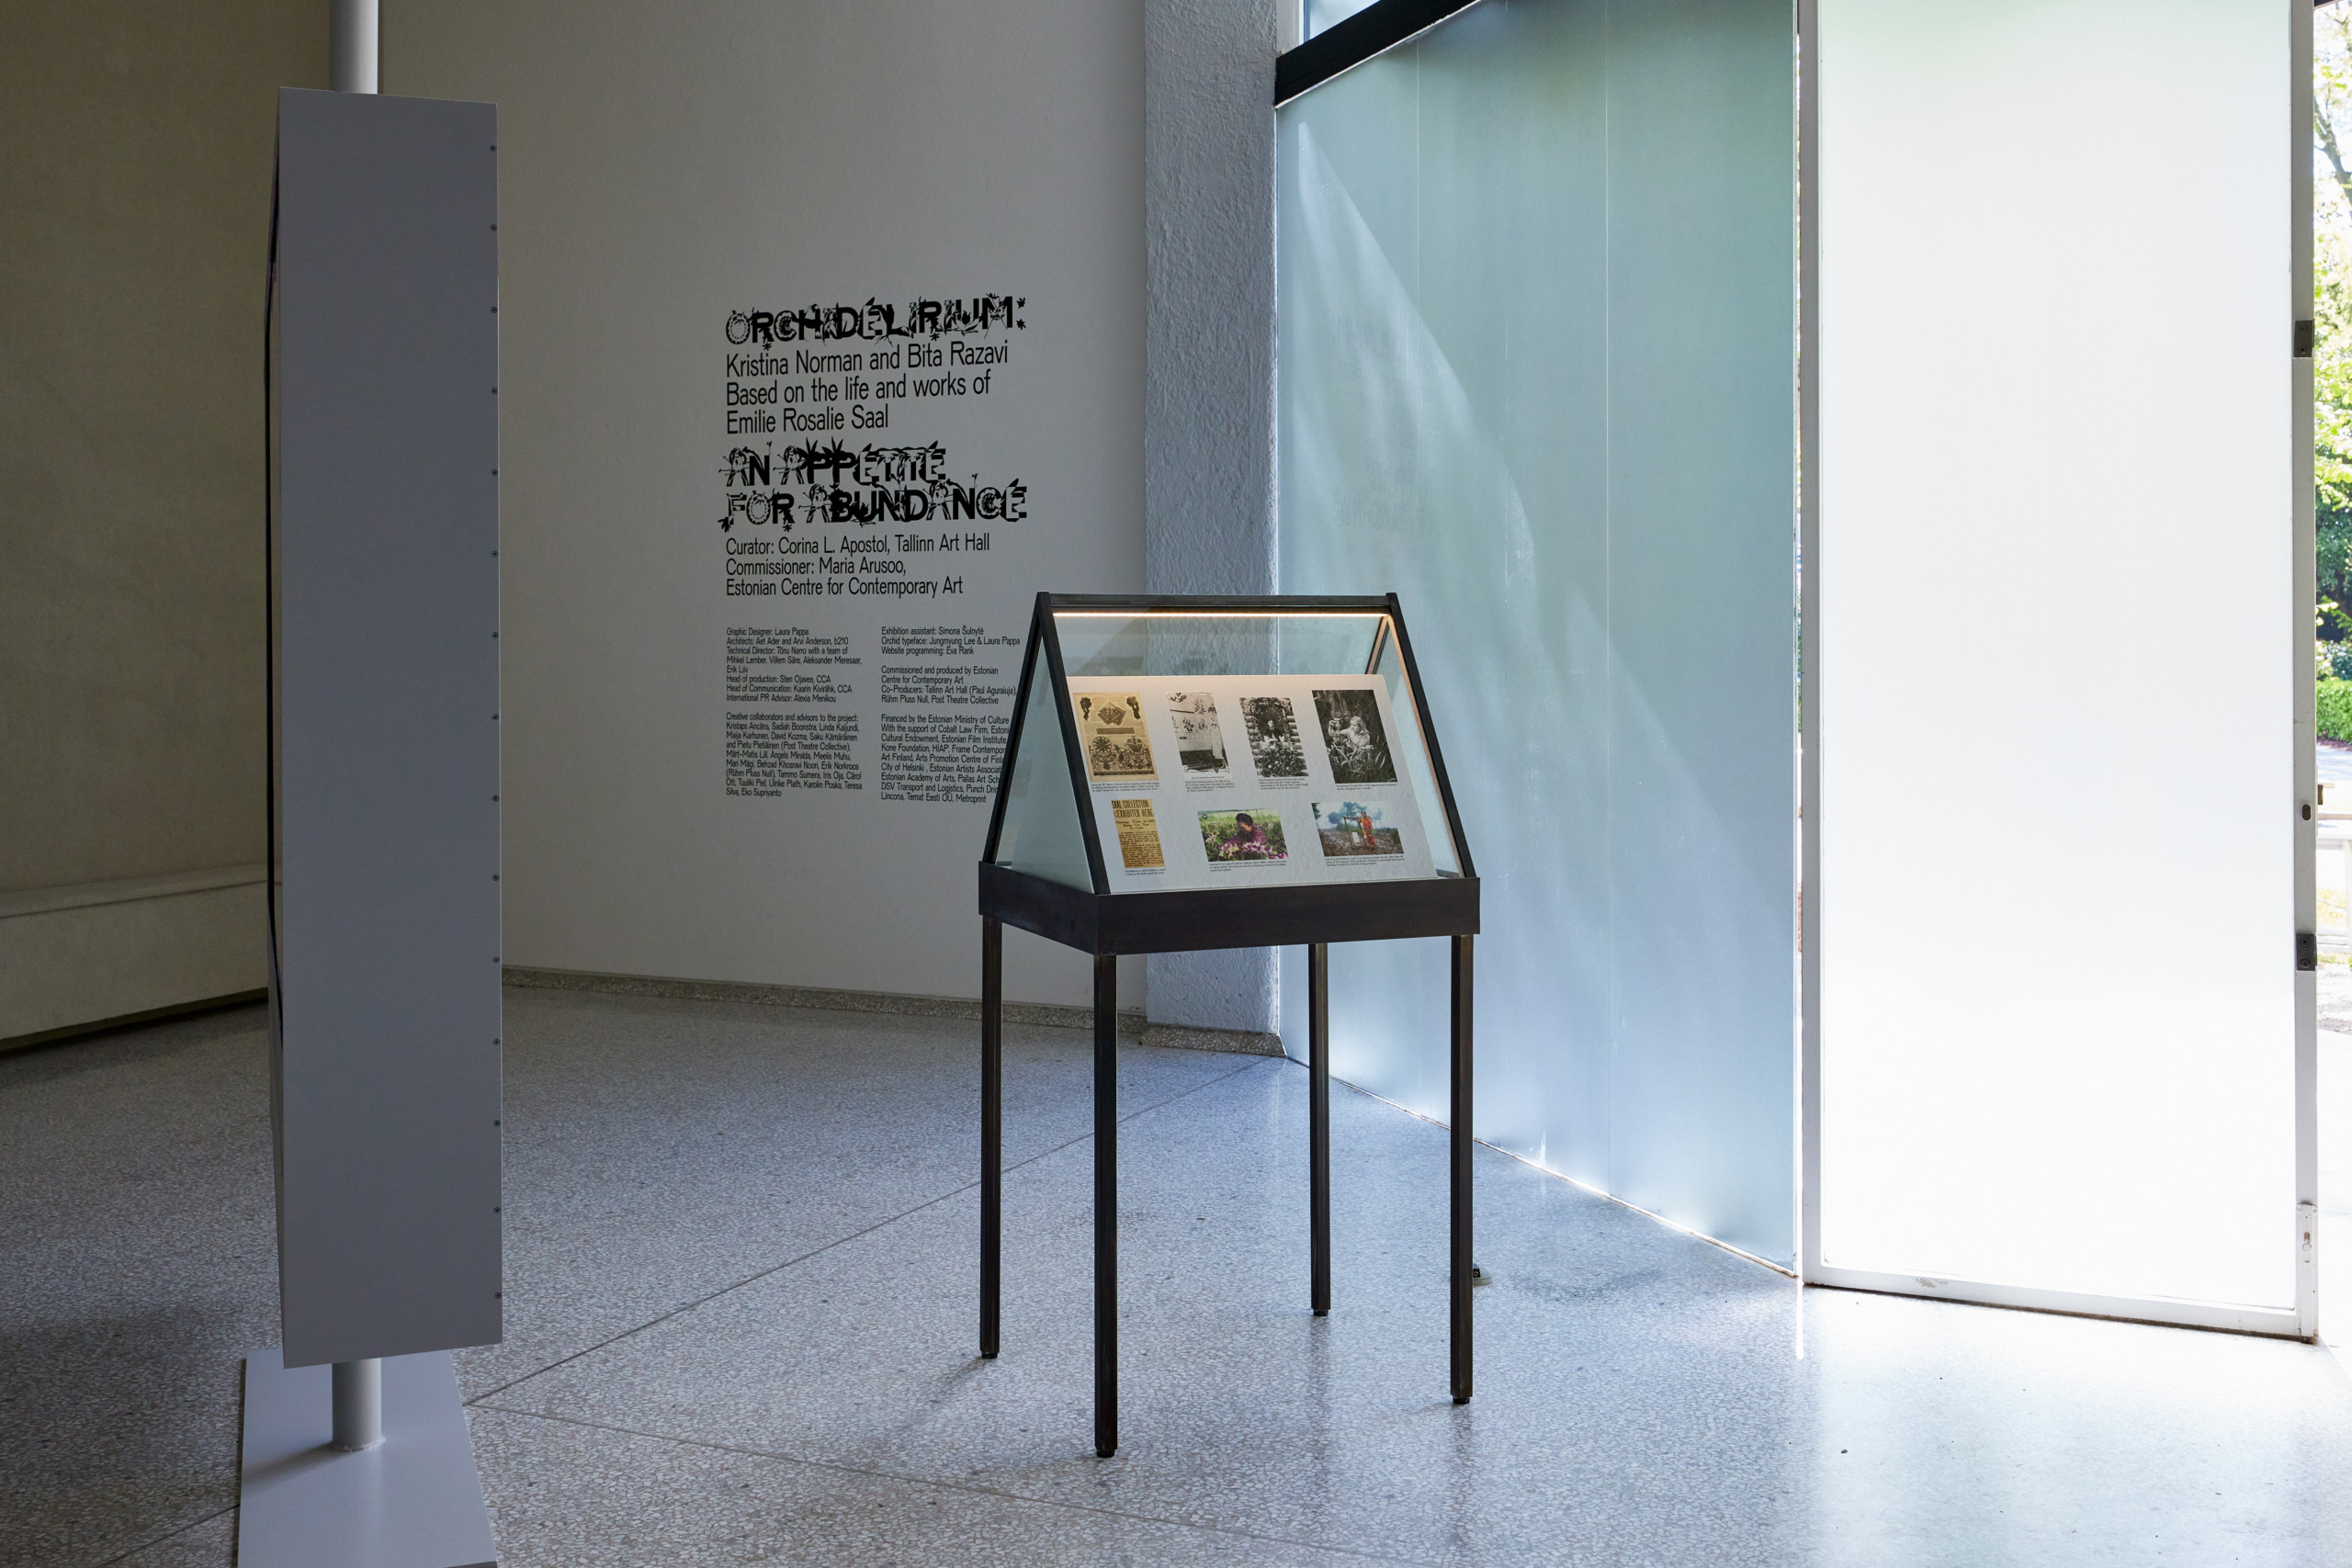 Installation image of an exhibition.